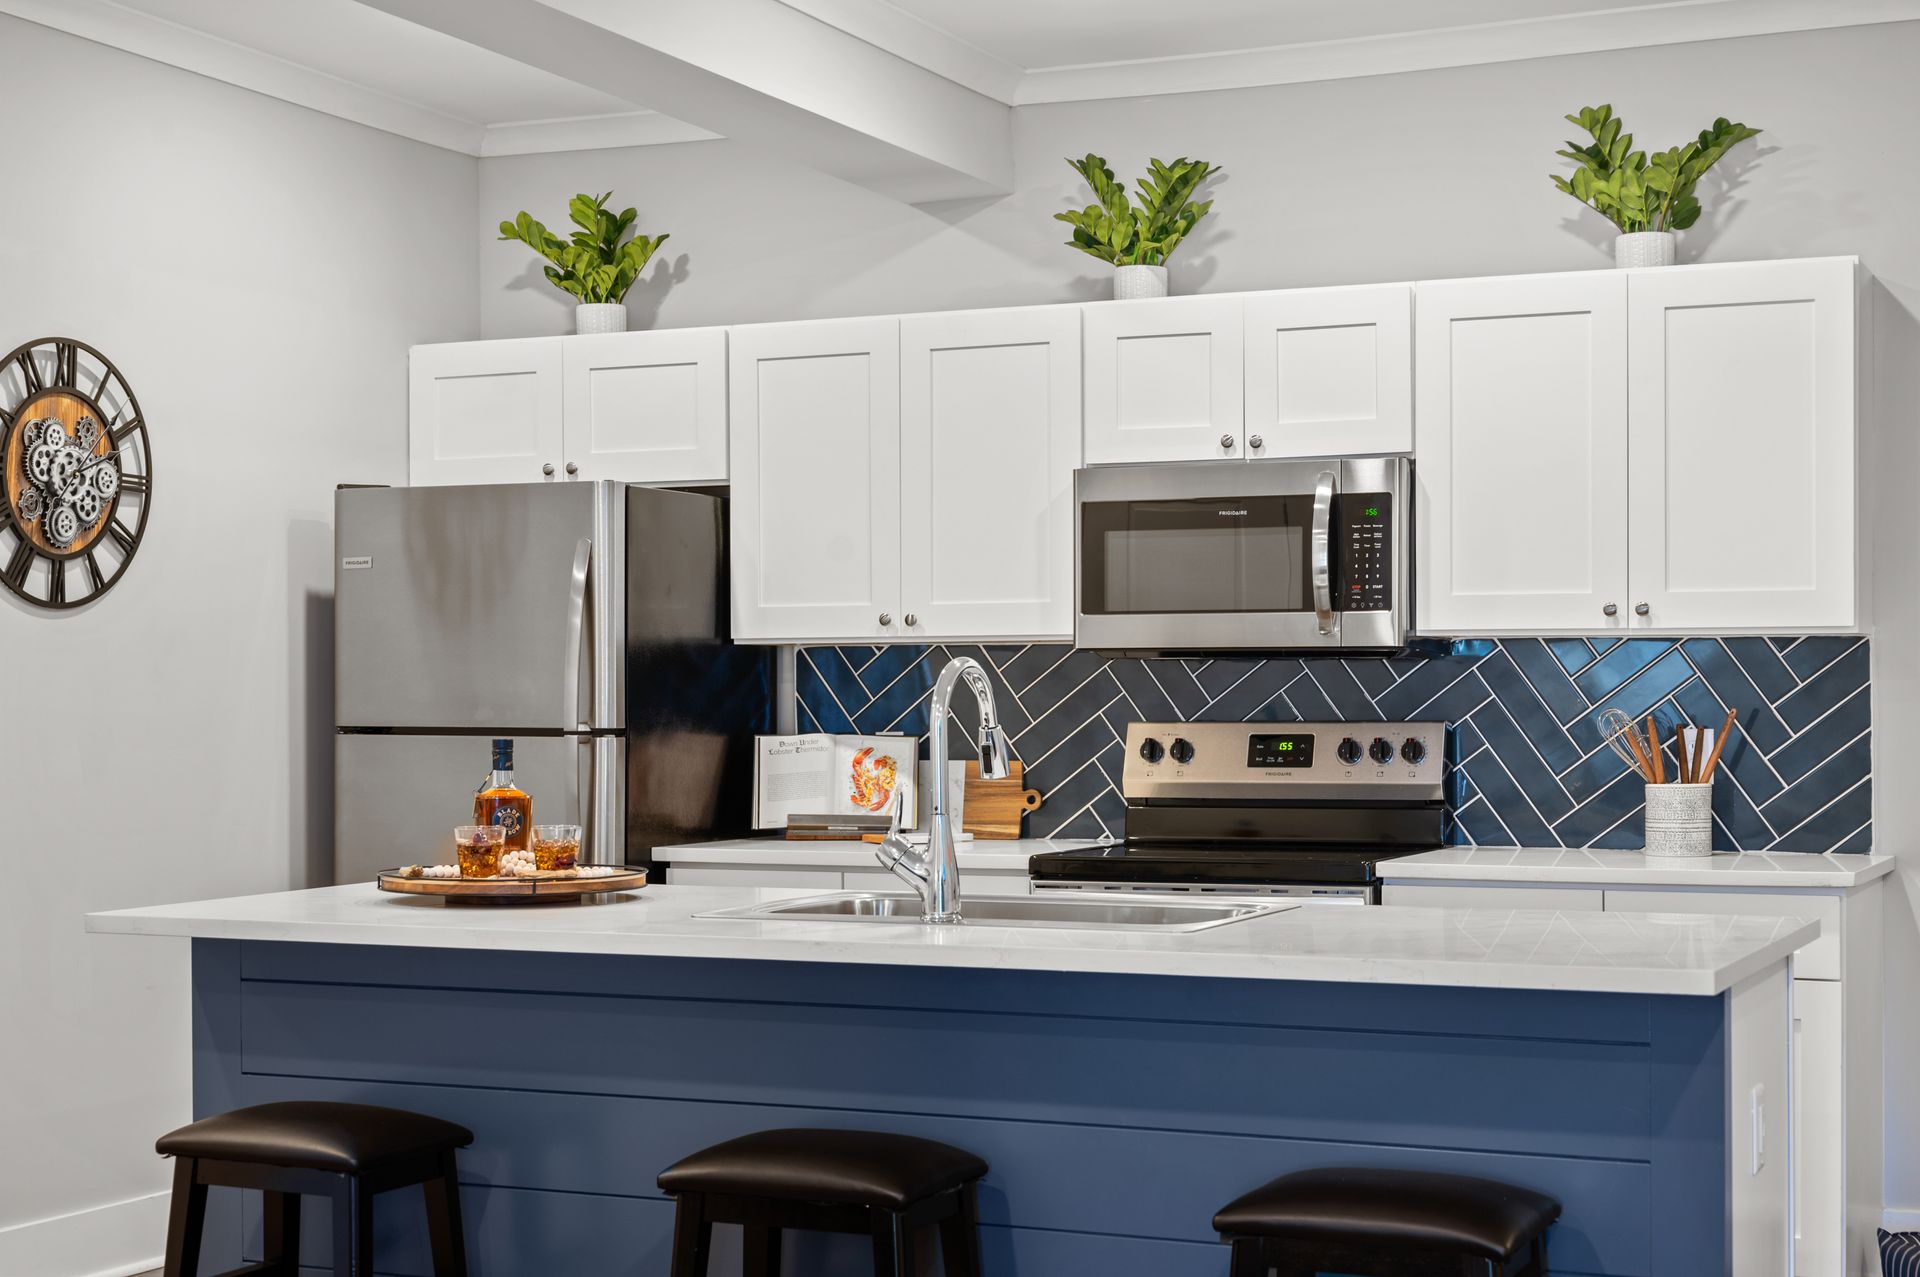 The apartment kitchen with a blue island, white cabinets, stainless steel appliances, and a clock on the wall .